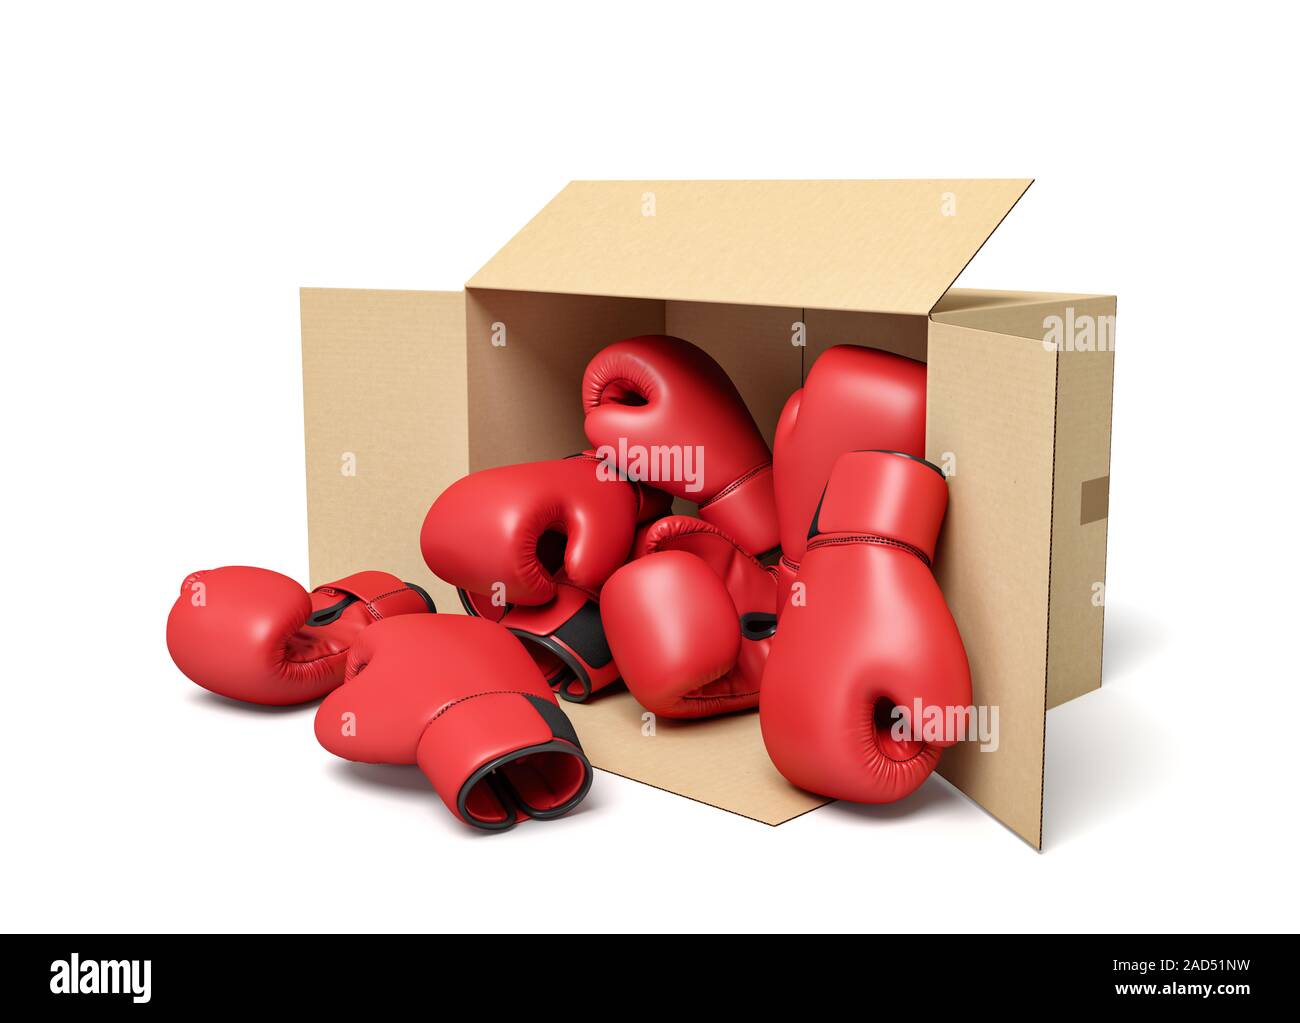 3d rendering of cardboard box lying sidelong full of red boxing gloves. Professional boxing. Buying equipment. Bulk purchase. Stock Photo